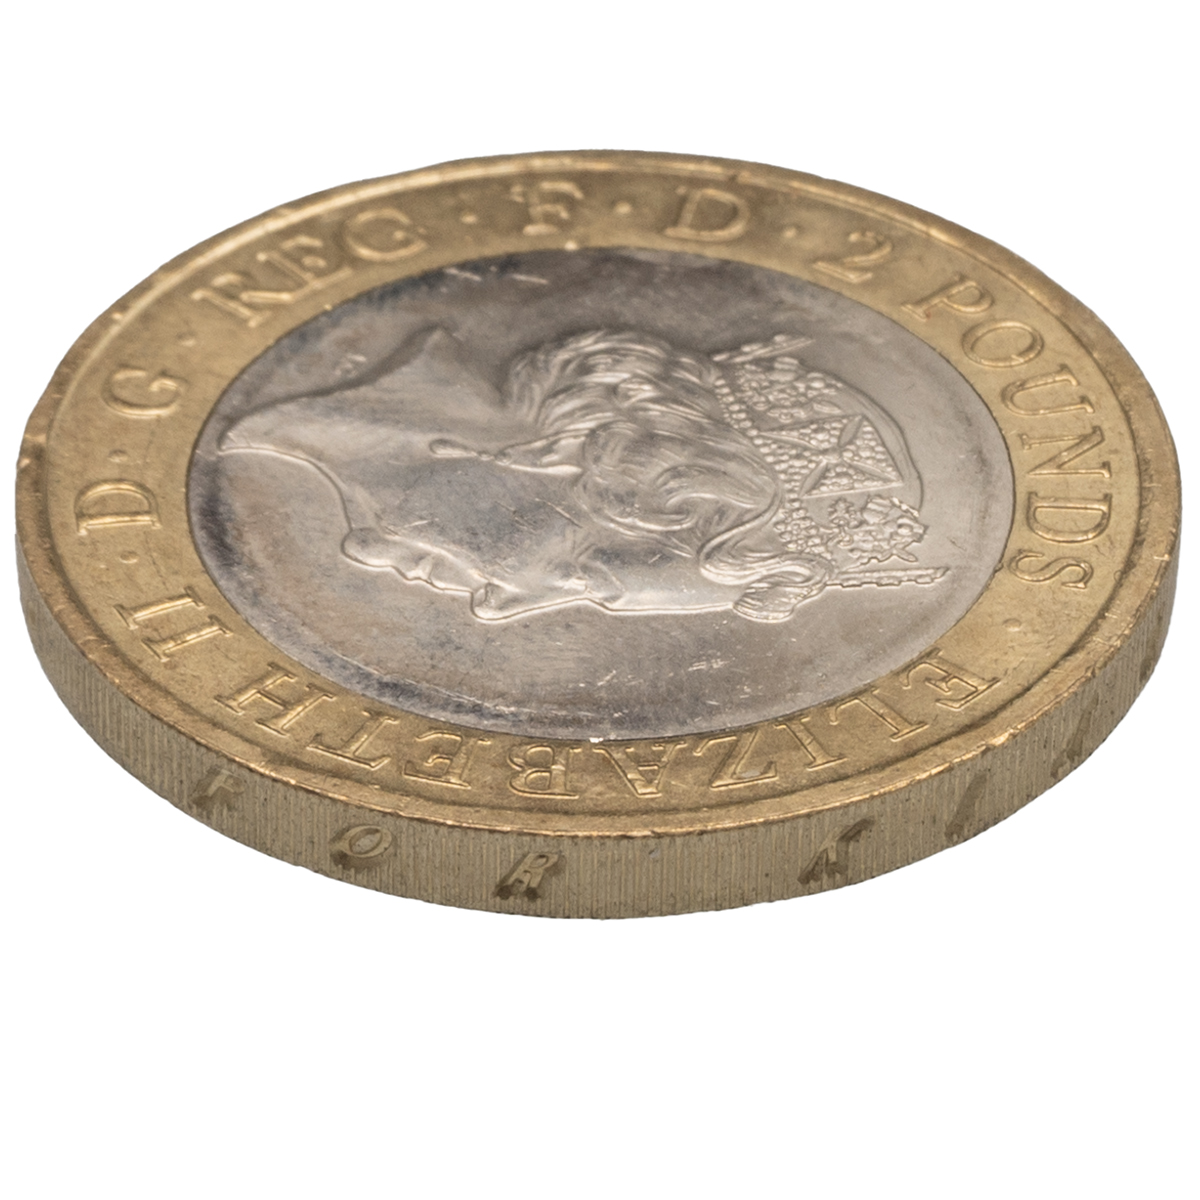 2016 William Shakespeare's Tragedies skull and rose error edge circulating £2 coin from The Royal... - Image 3 of 6